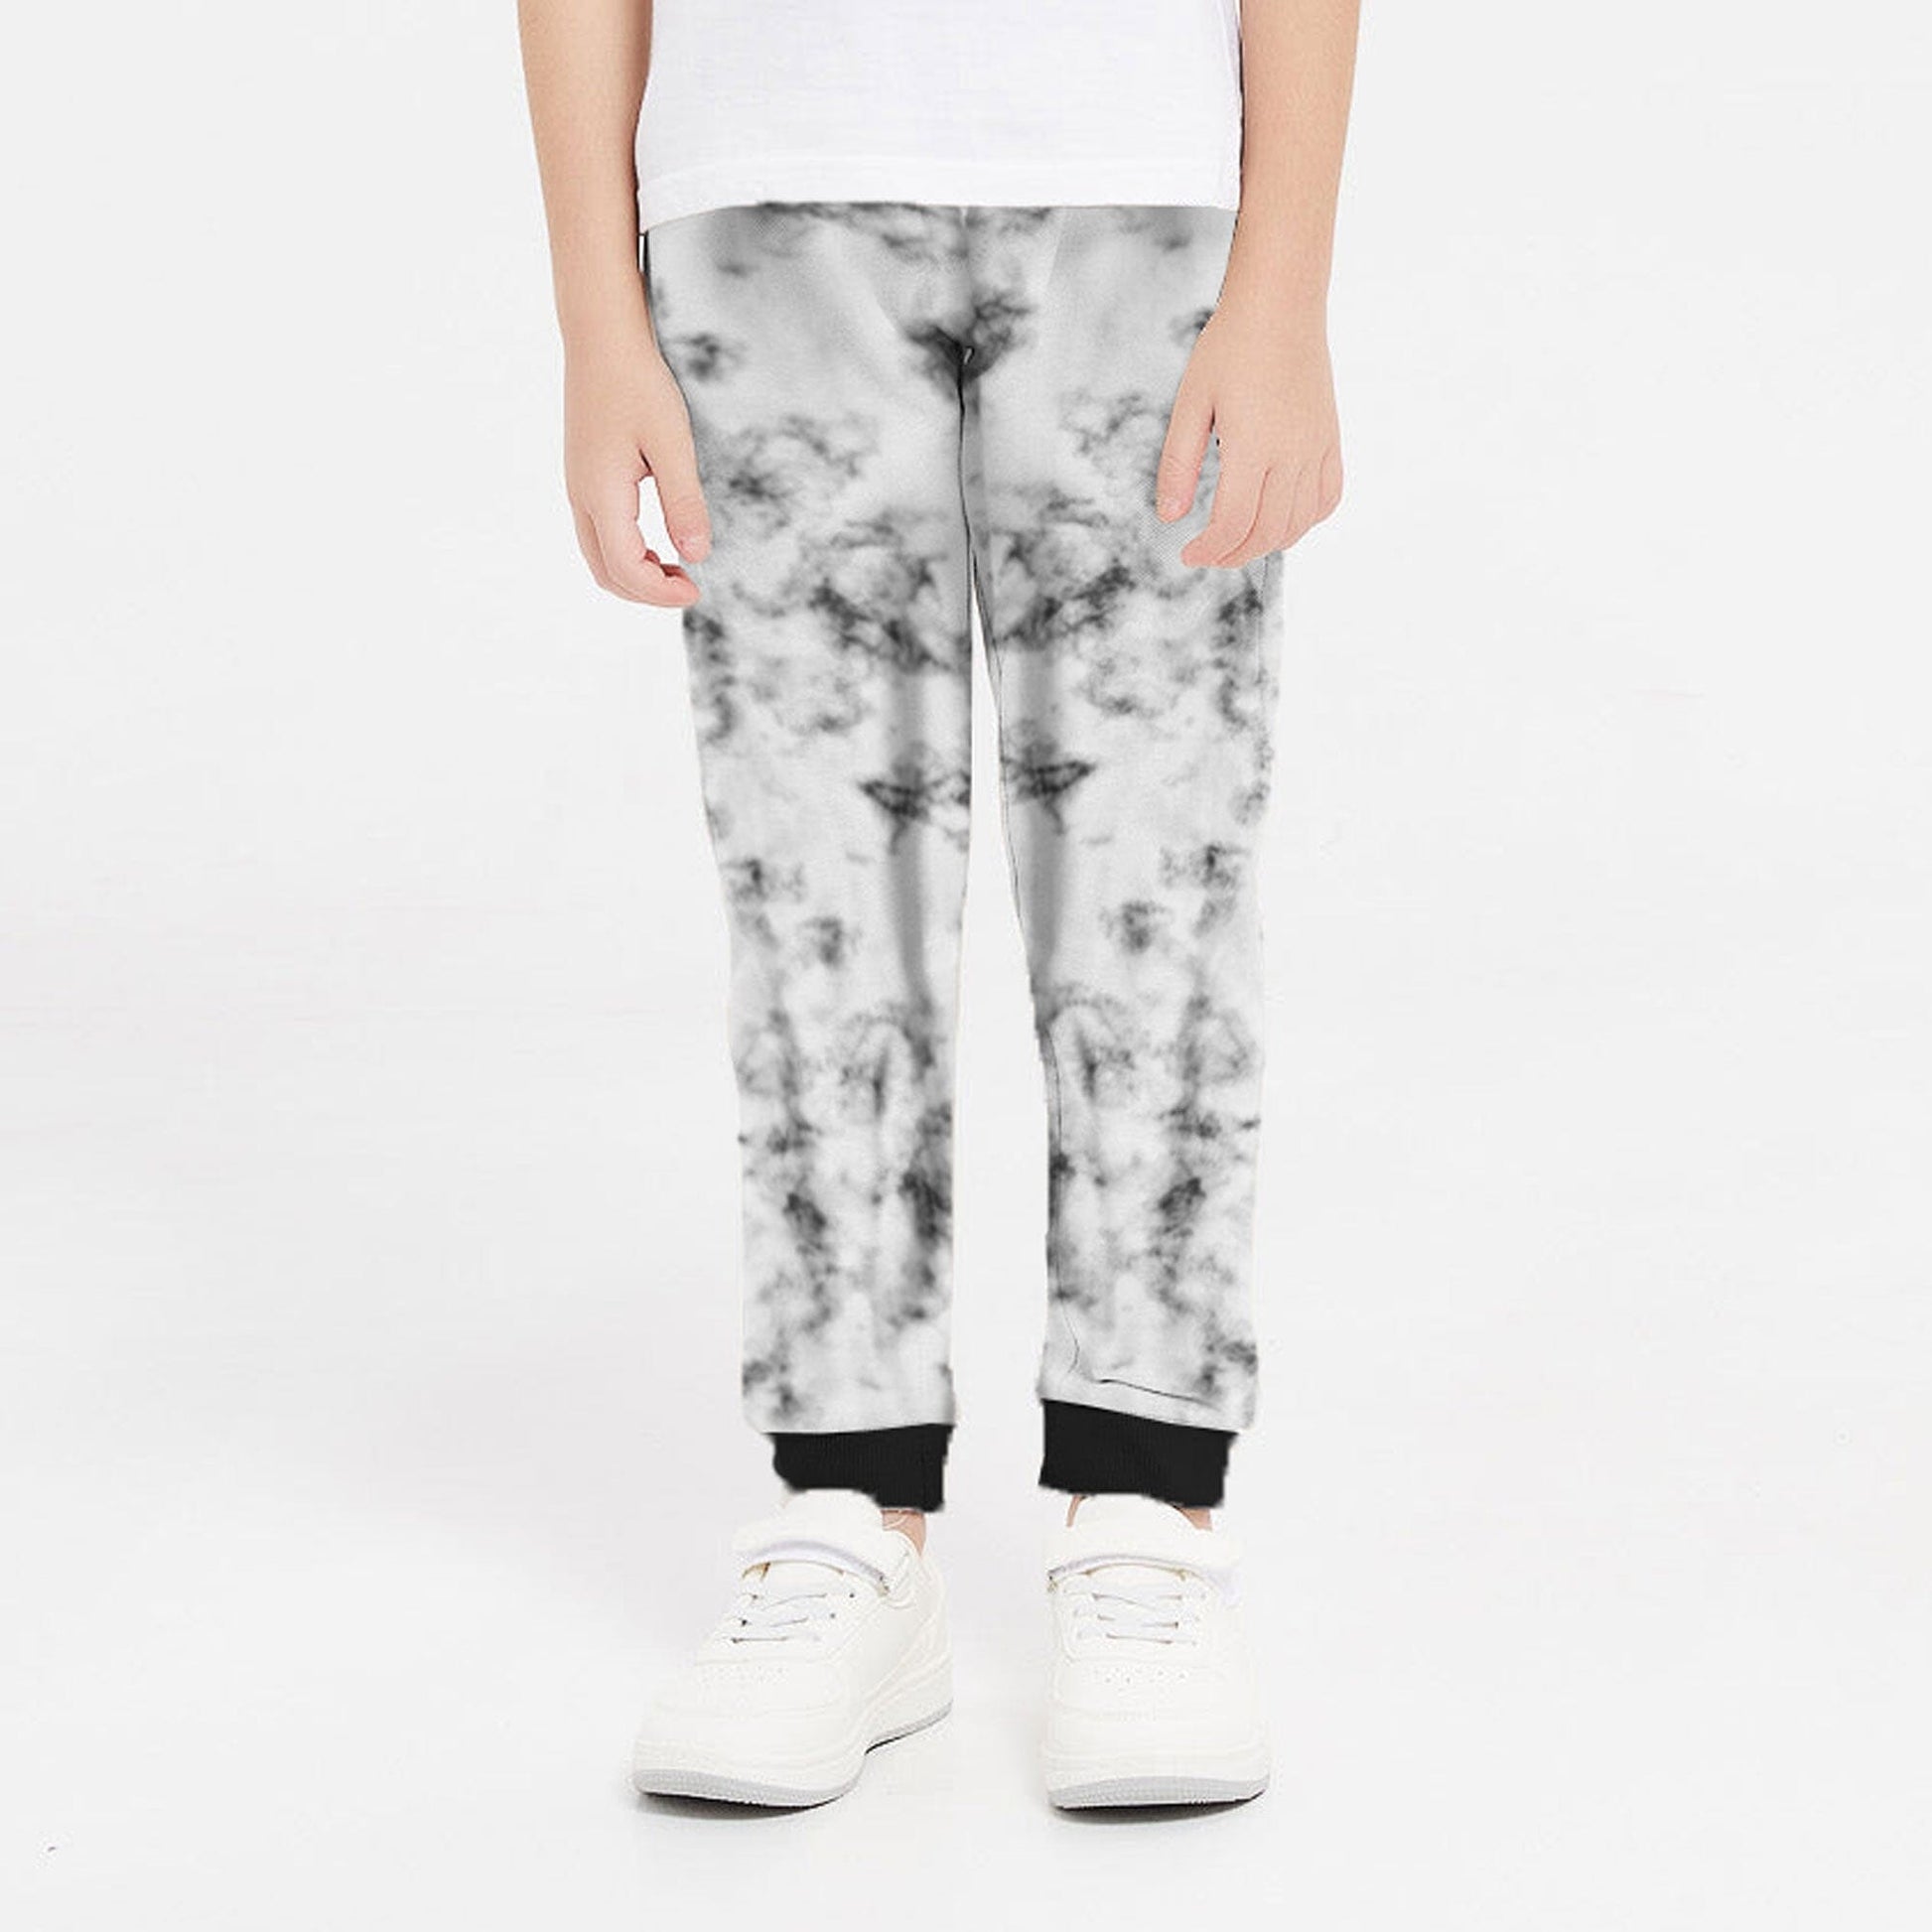 Minoti Kid's Tie And Dye Style Terry Trousers Boy's Trousers SZK White & Black 7-8 Years 